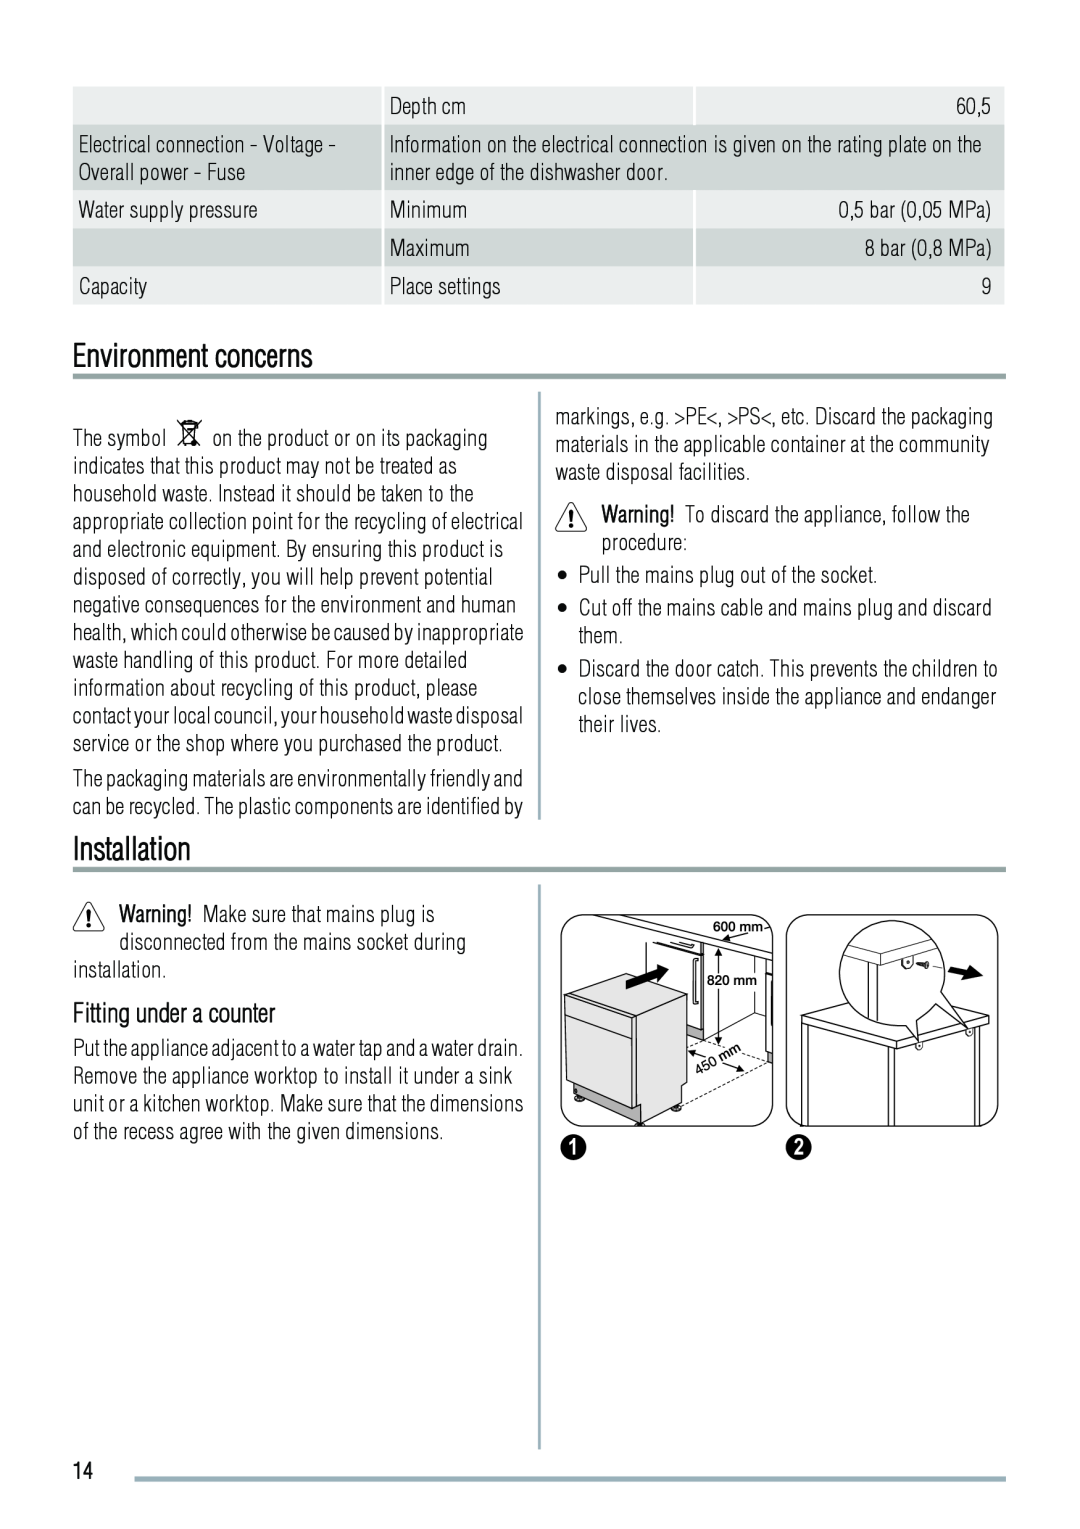 Zanussi ZDS 2010 user manual Environment concerns, Installation, Fitting under a counter 